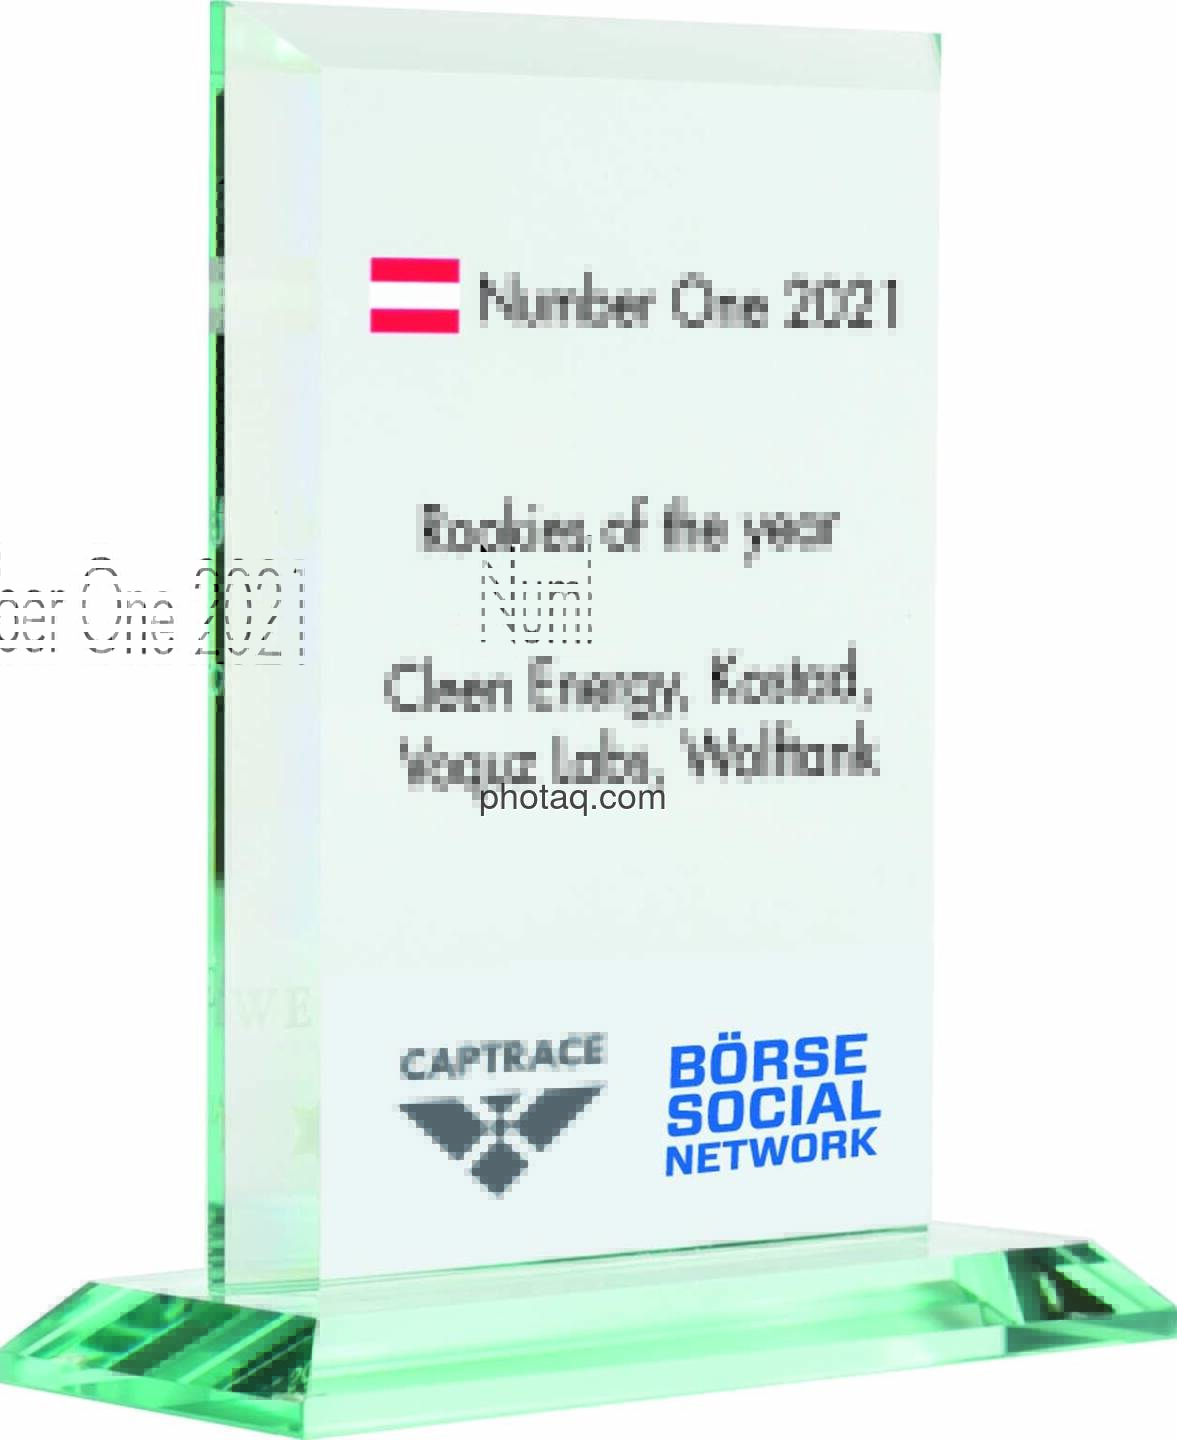 Number One Awards 2021 - Rookies of the year Cleen Energy, Kostad, Voquz Labs, Wolftank